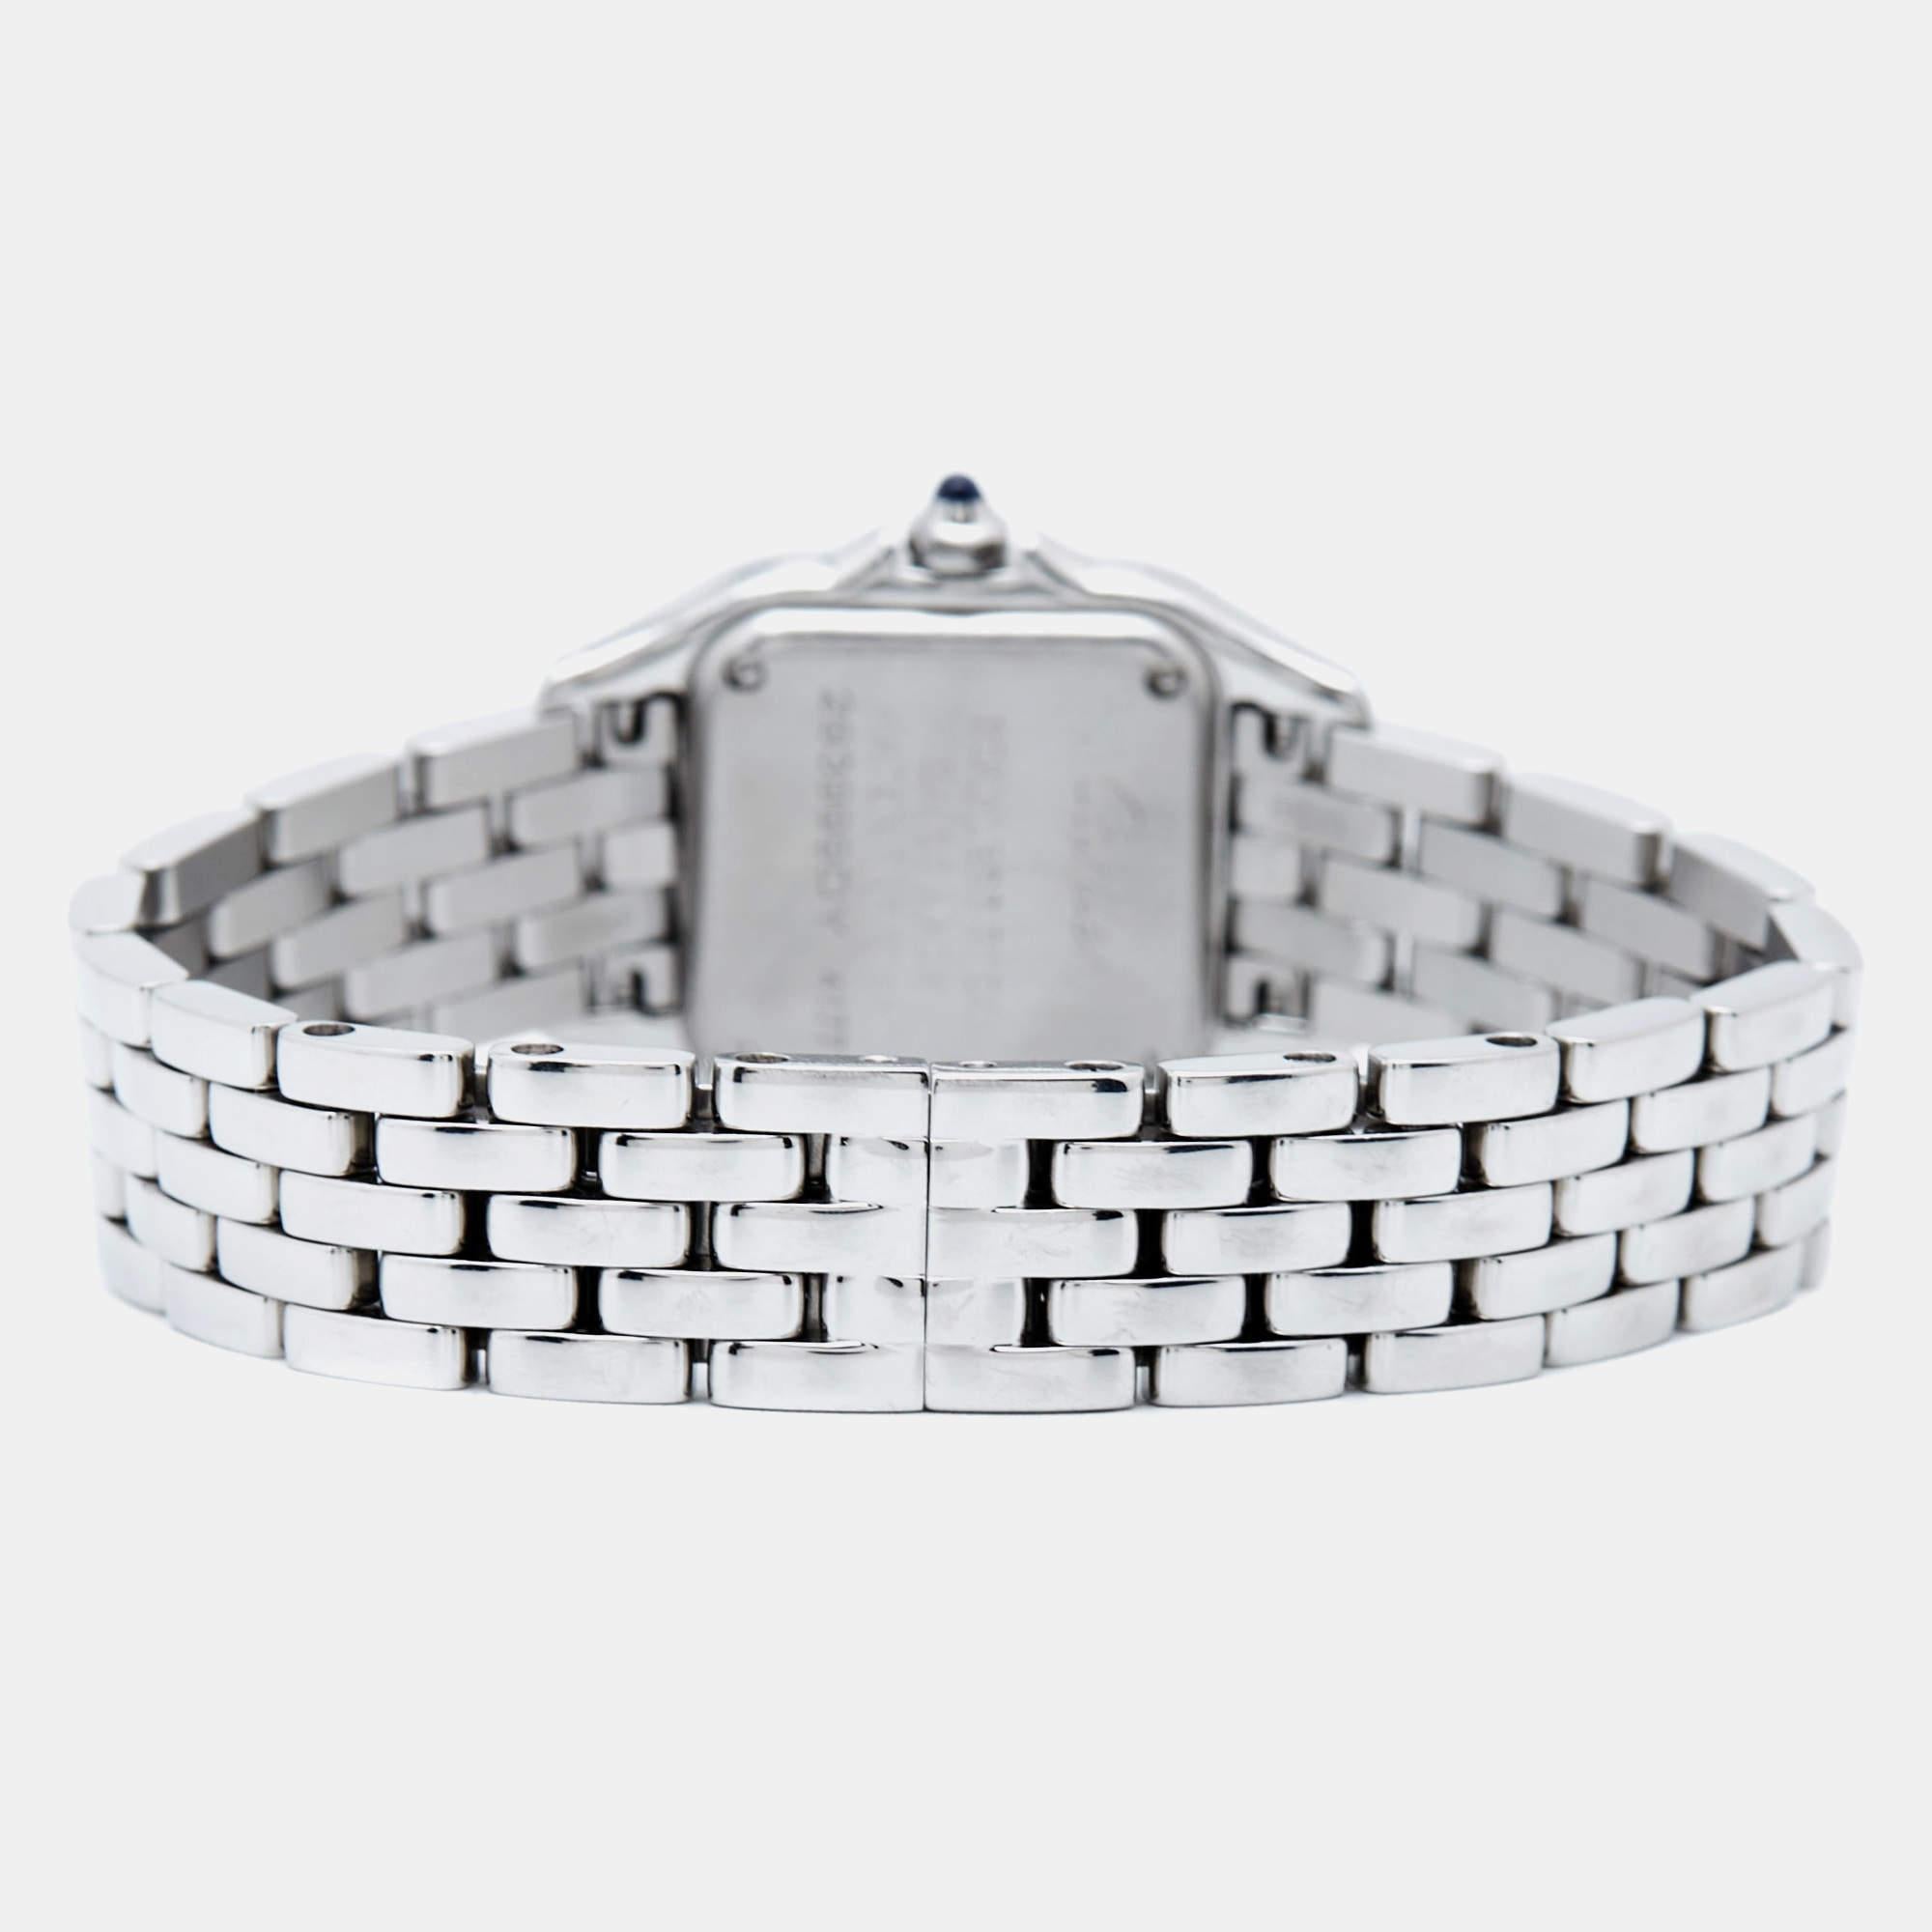 This Panthère de Cartier from Cartier is a creation worthy of being yours. As a true style icon, It has a grand fusion of elegance with contemporary charm in every detail, from the square case to the concealed clasp. Using stainless steel, Cartier